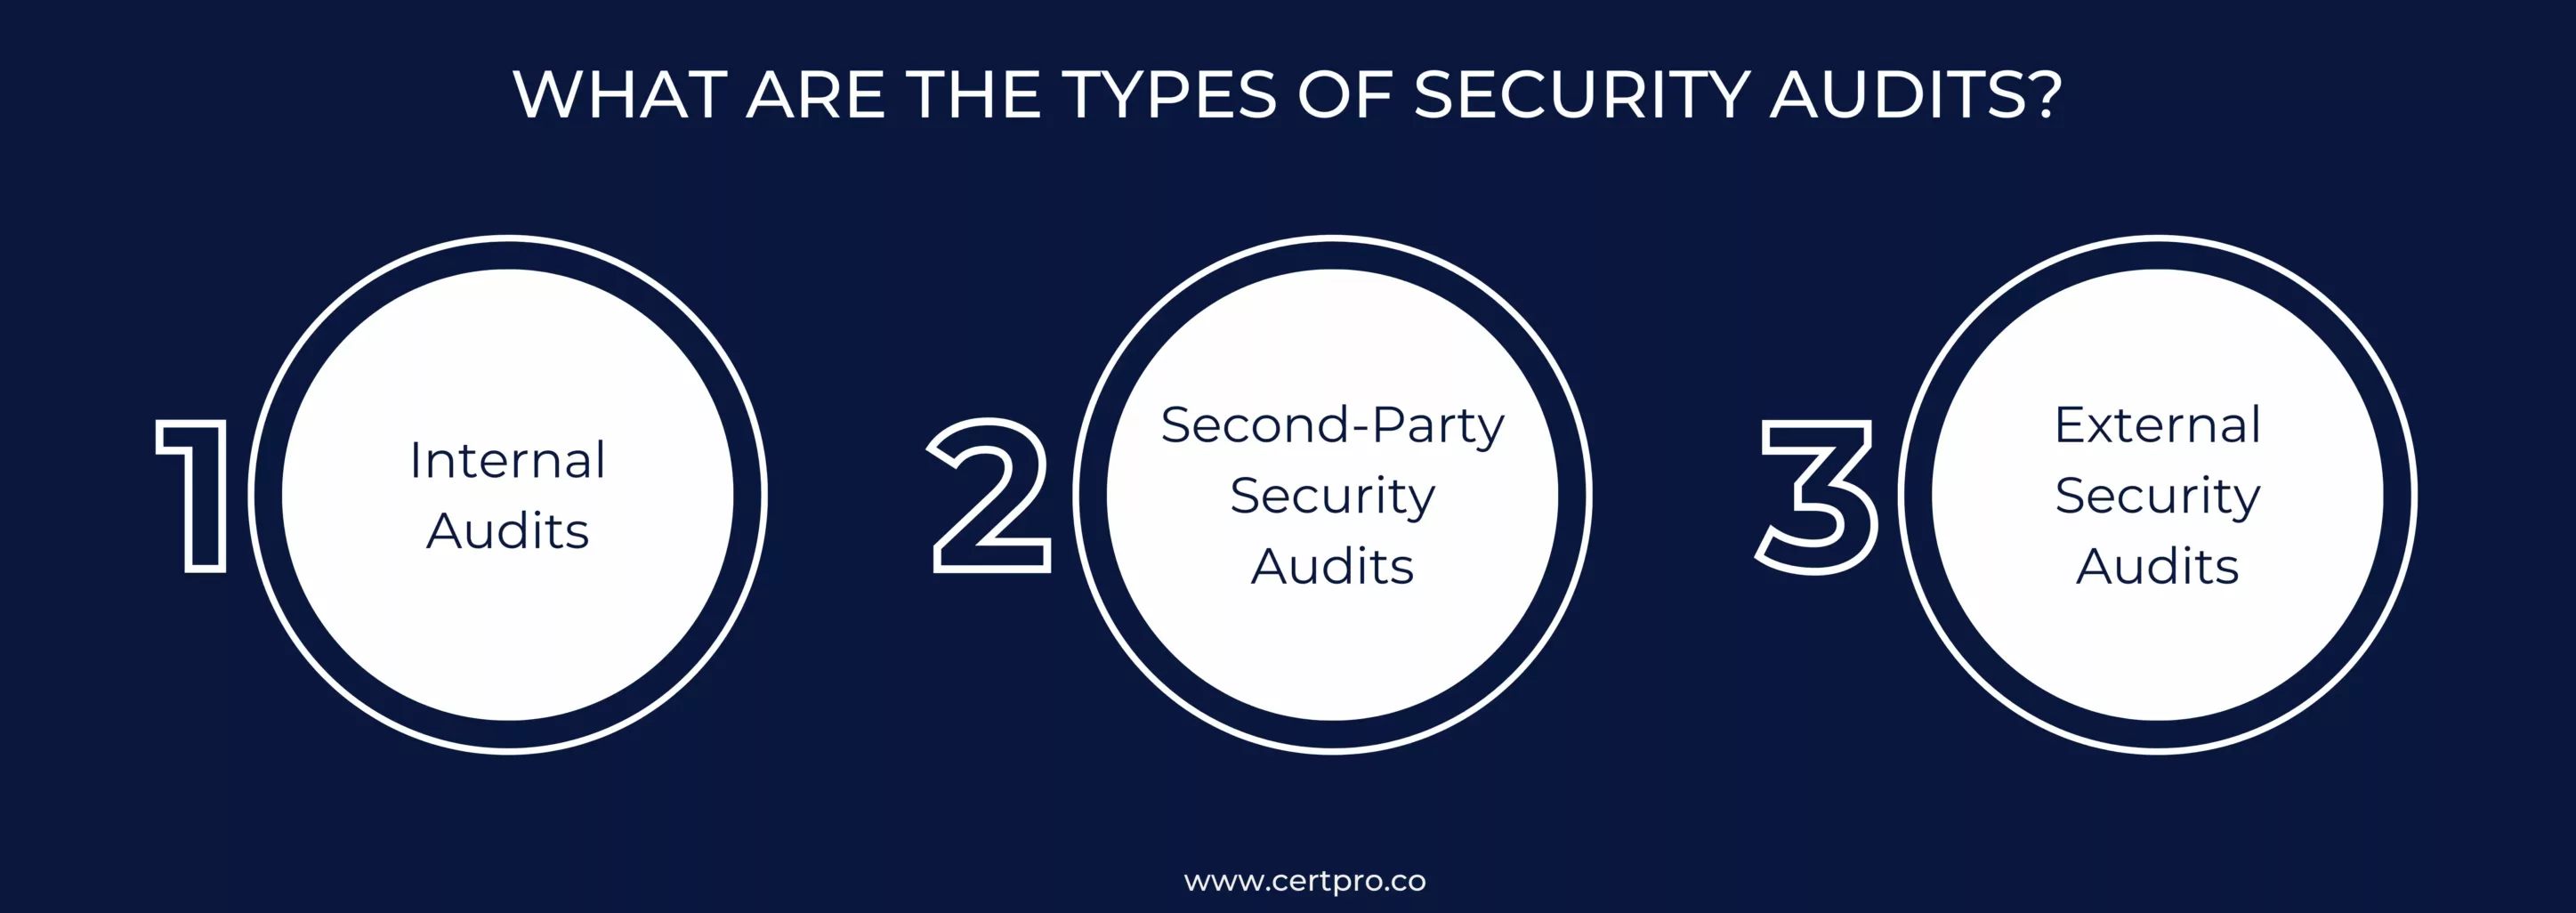 WHAT ARE THE TYPES OF SECURITY AUDITS